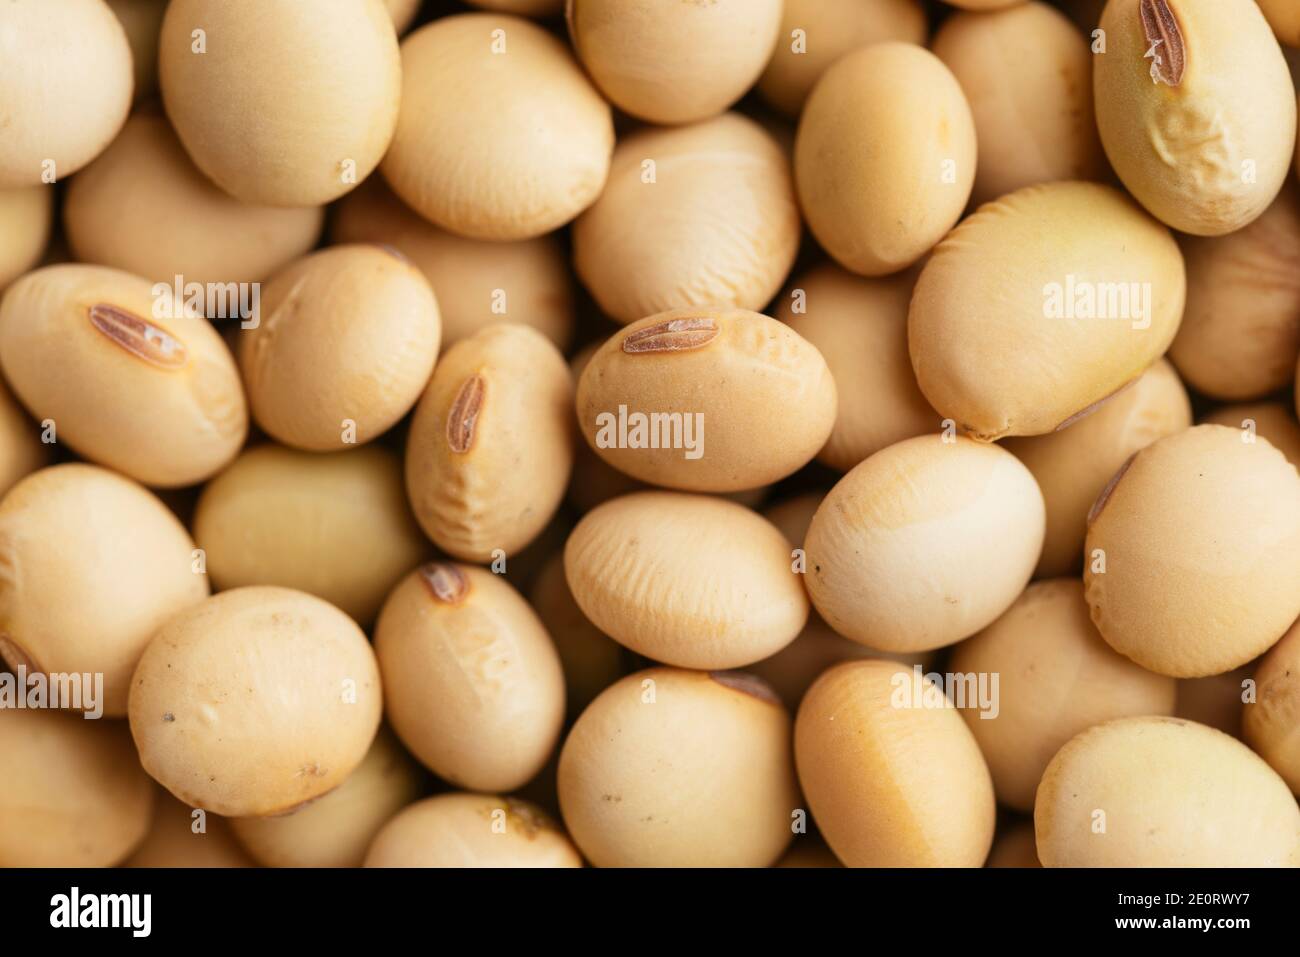 Soybeans, variety 'Green shell' for growing. Stock Photo